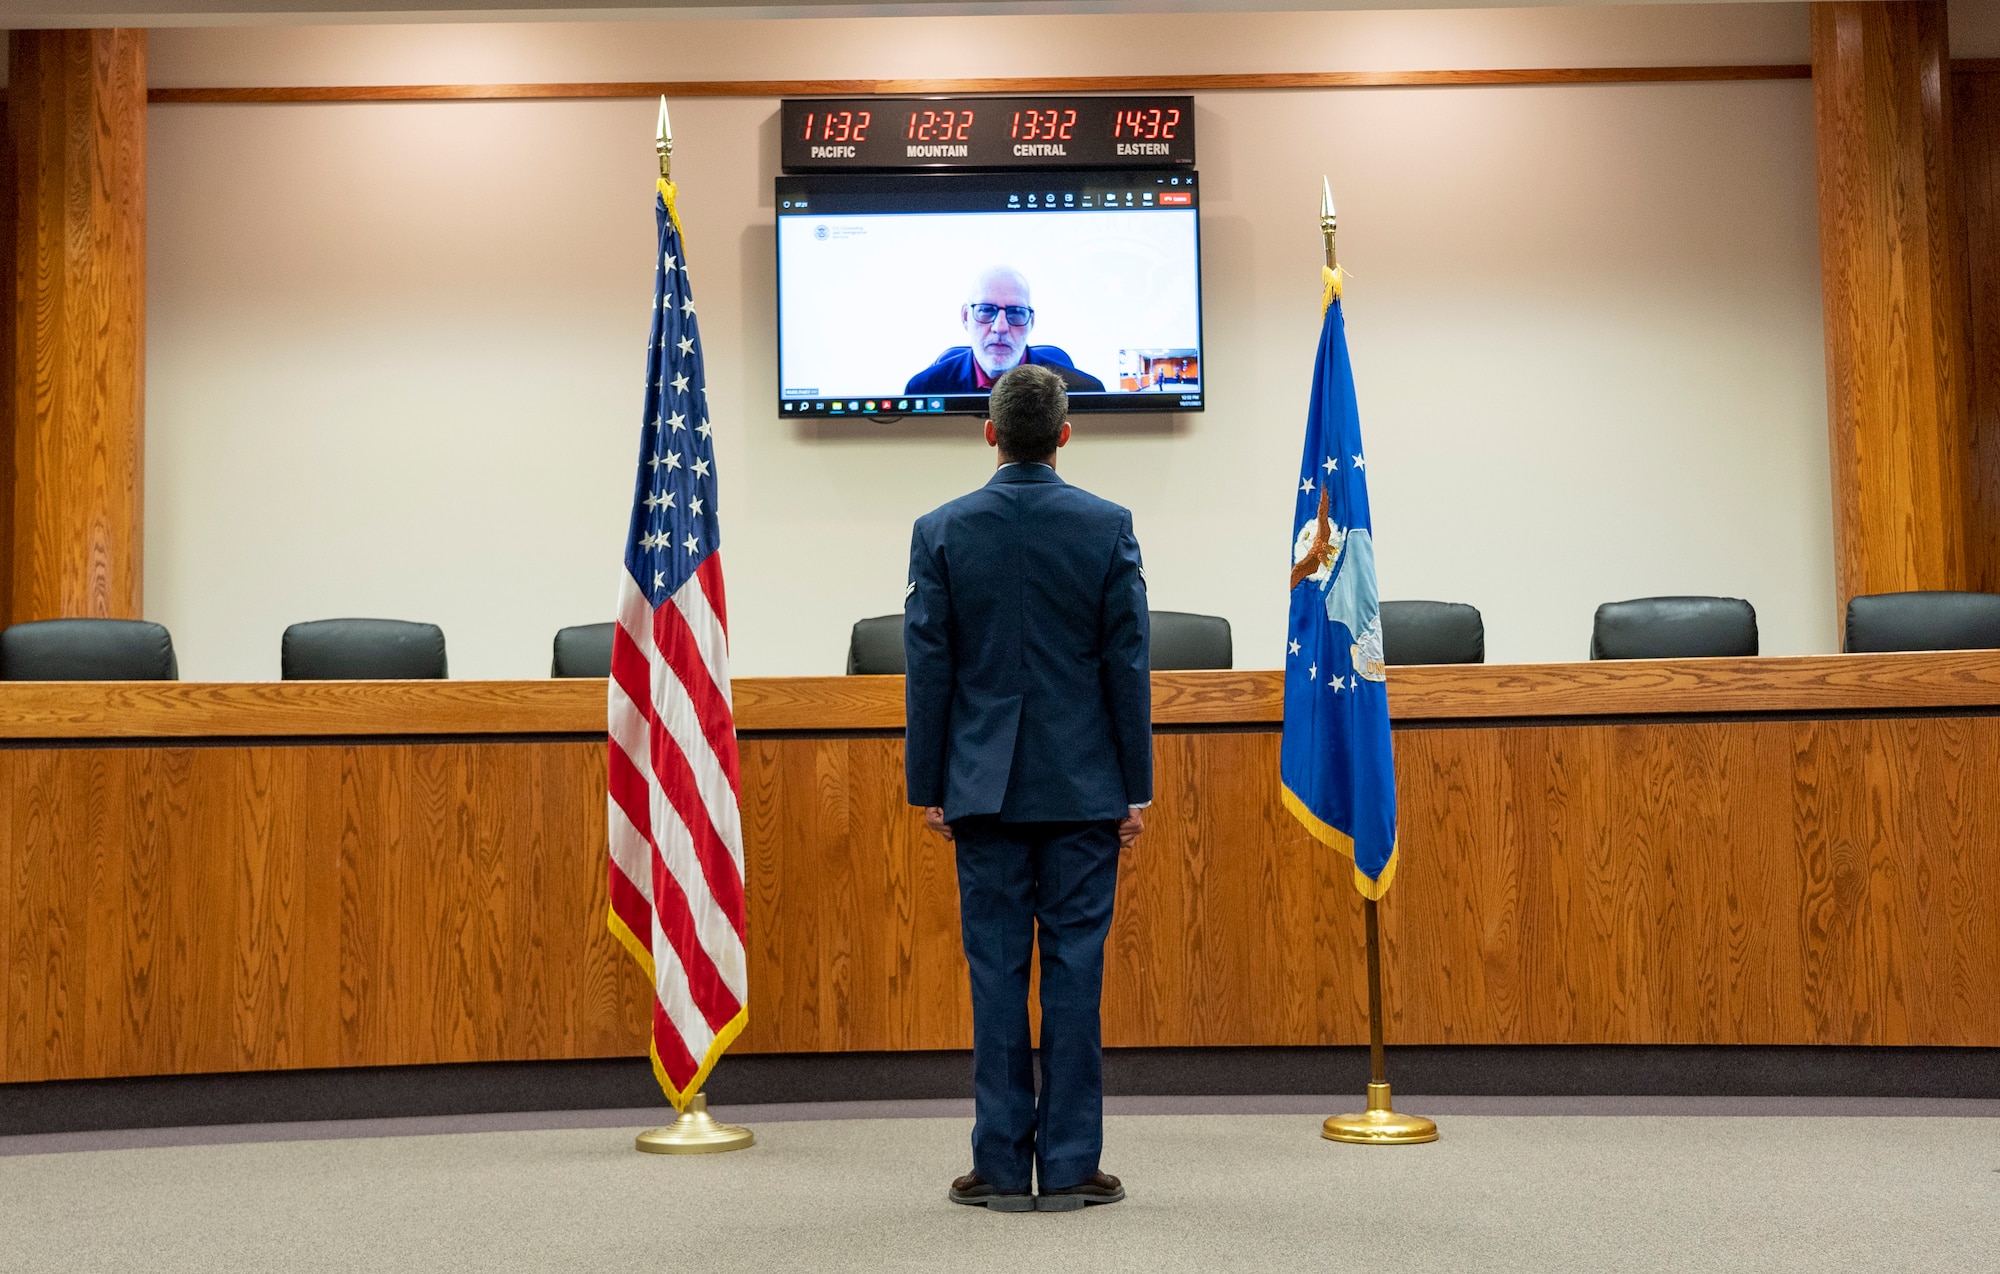 Airman 1st Class Minick standing at attention between the U.S. flag at left and U.S. Air Force flag at right looking up at a USCIS representative pictured on a television monitor.